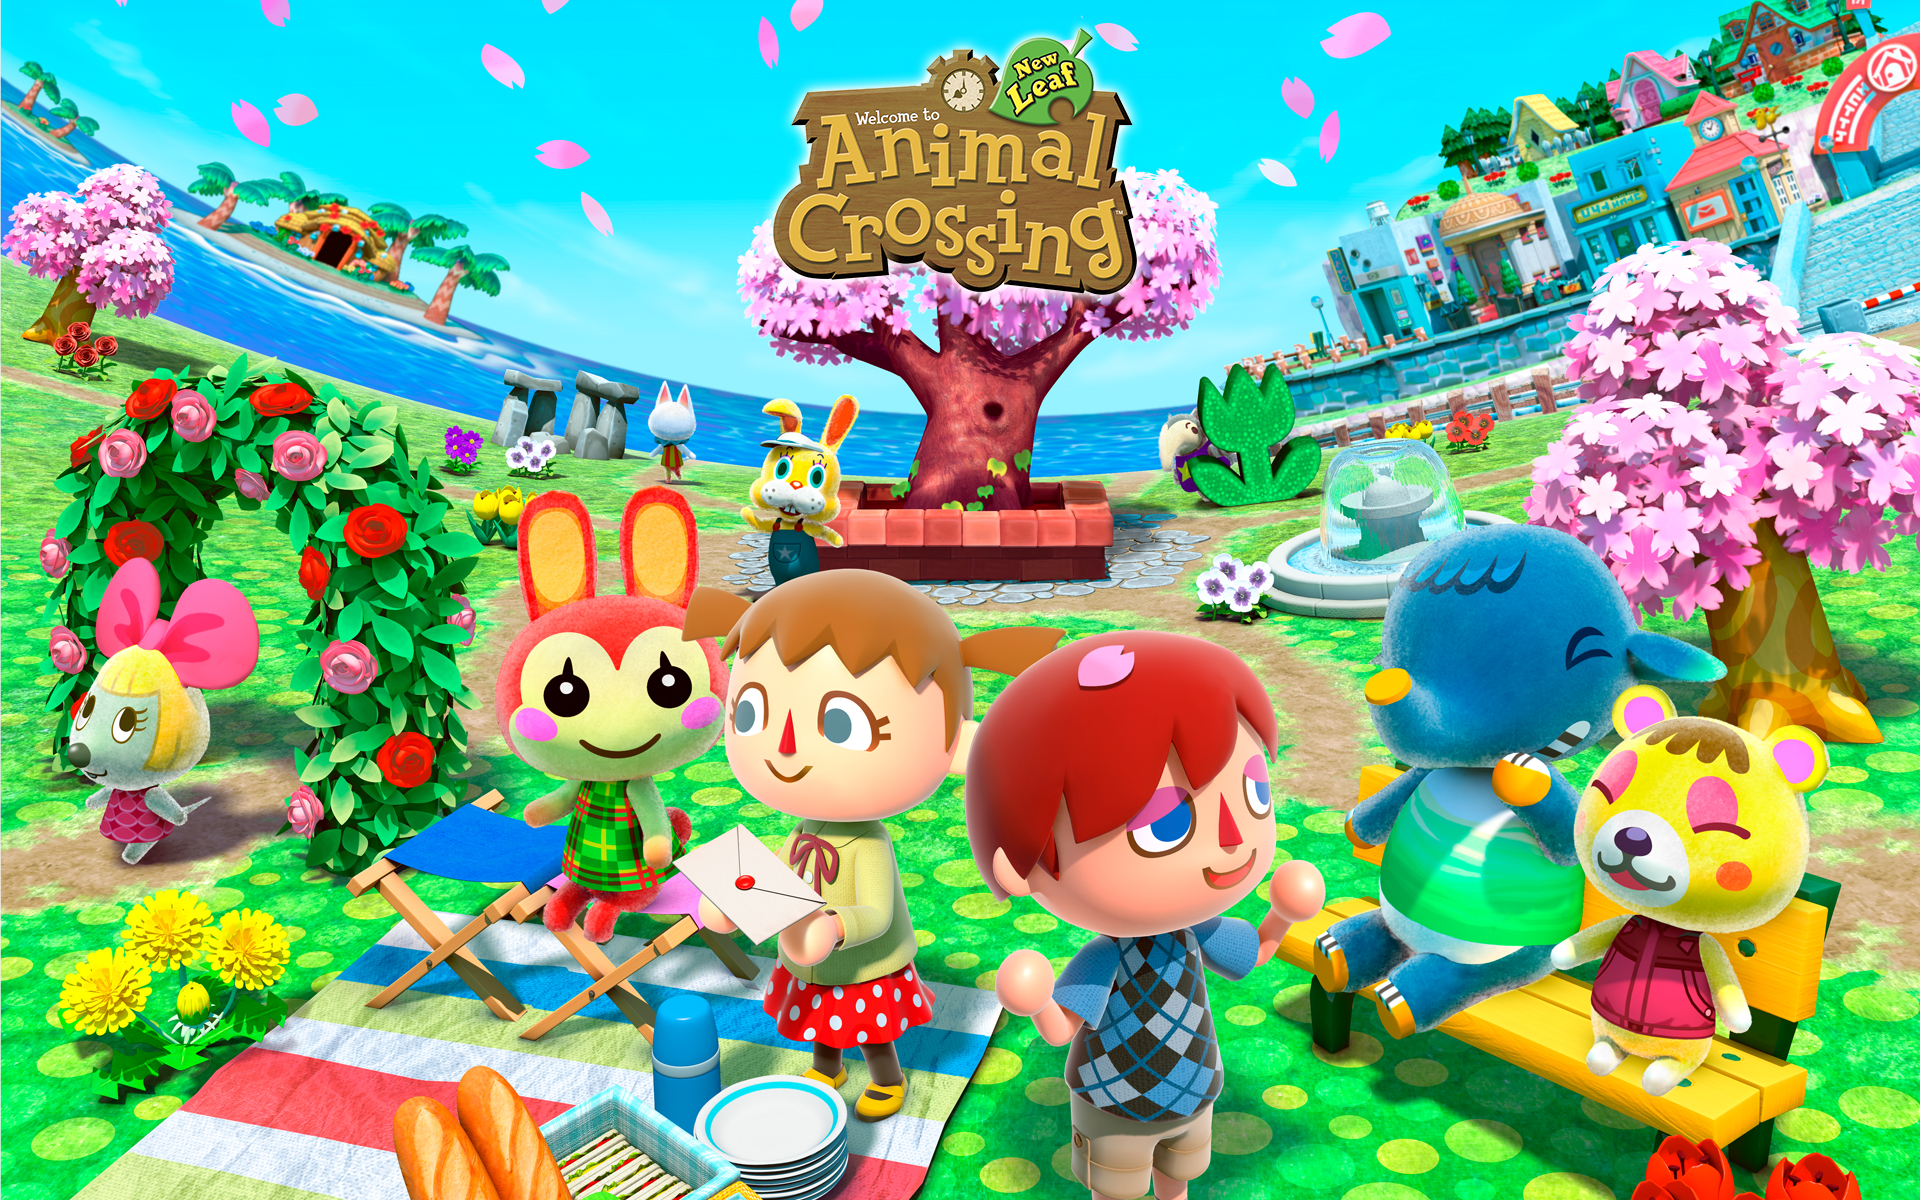 HQ Animal Crossing: New Leaf Wallpapers | File 2538.94Kb